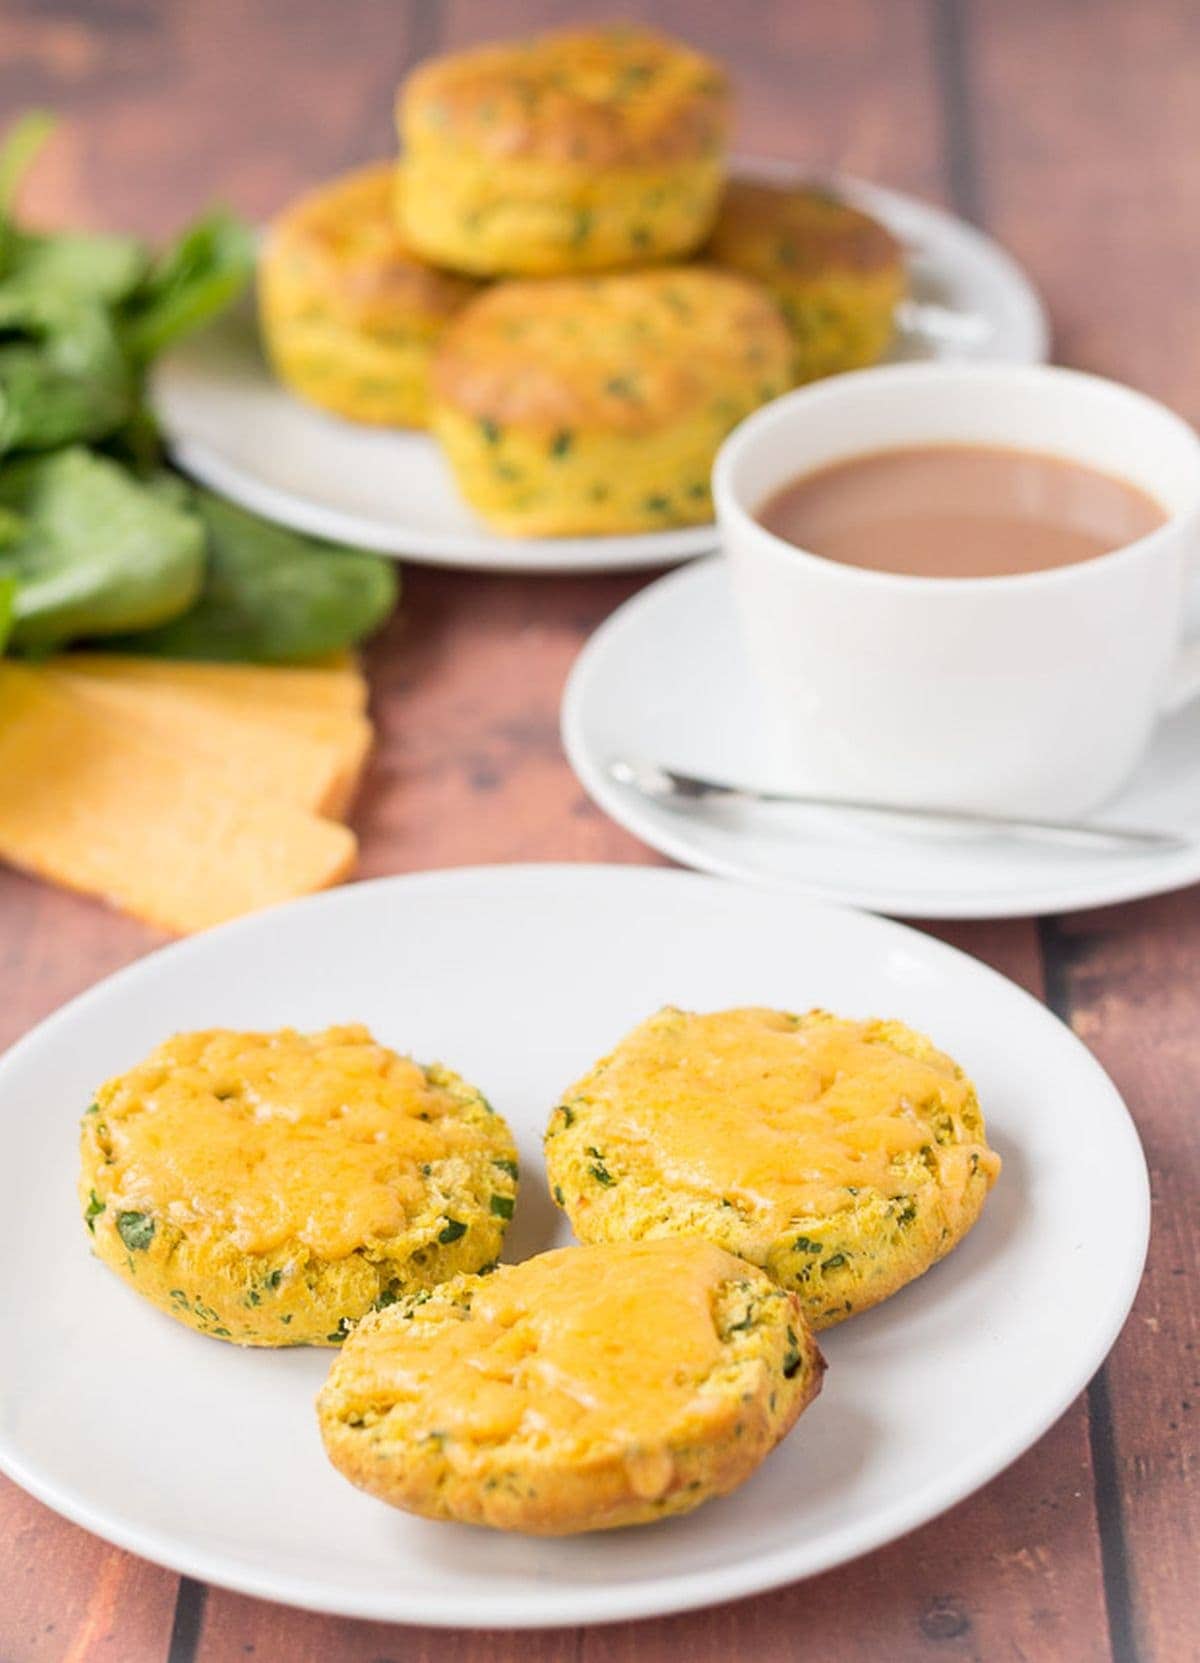 A plate of sweet potato spinach scones cut in half with melted cheese on. A cup of tea and the rest of the whole spinach scones on another plate in the background.